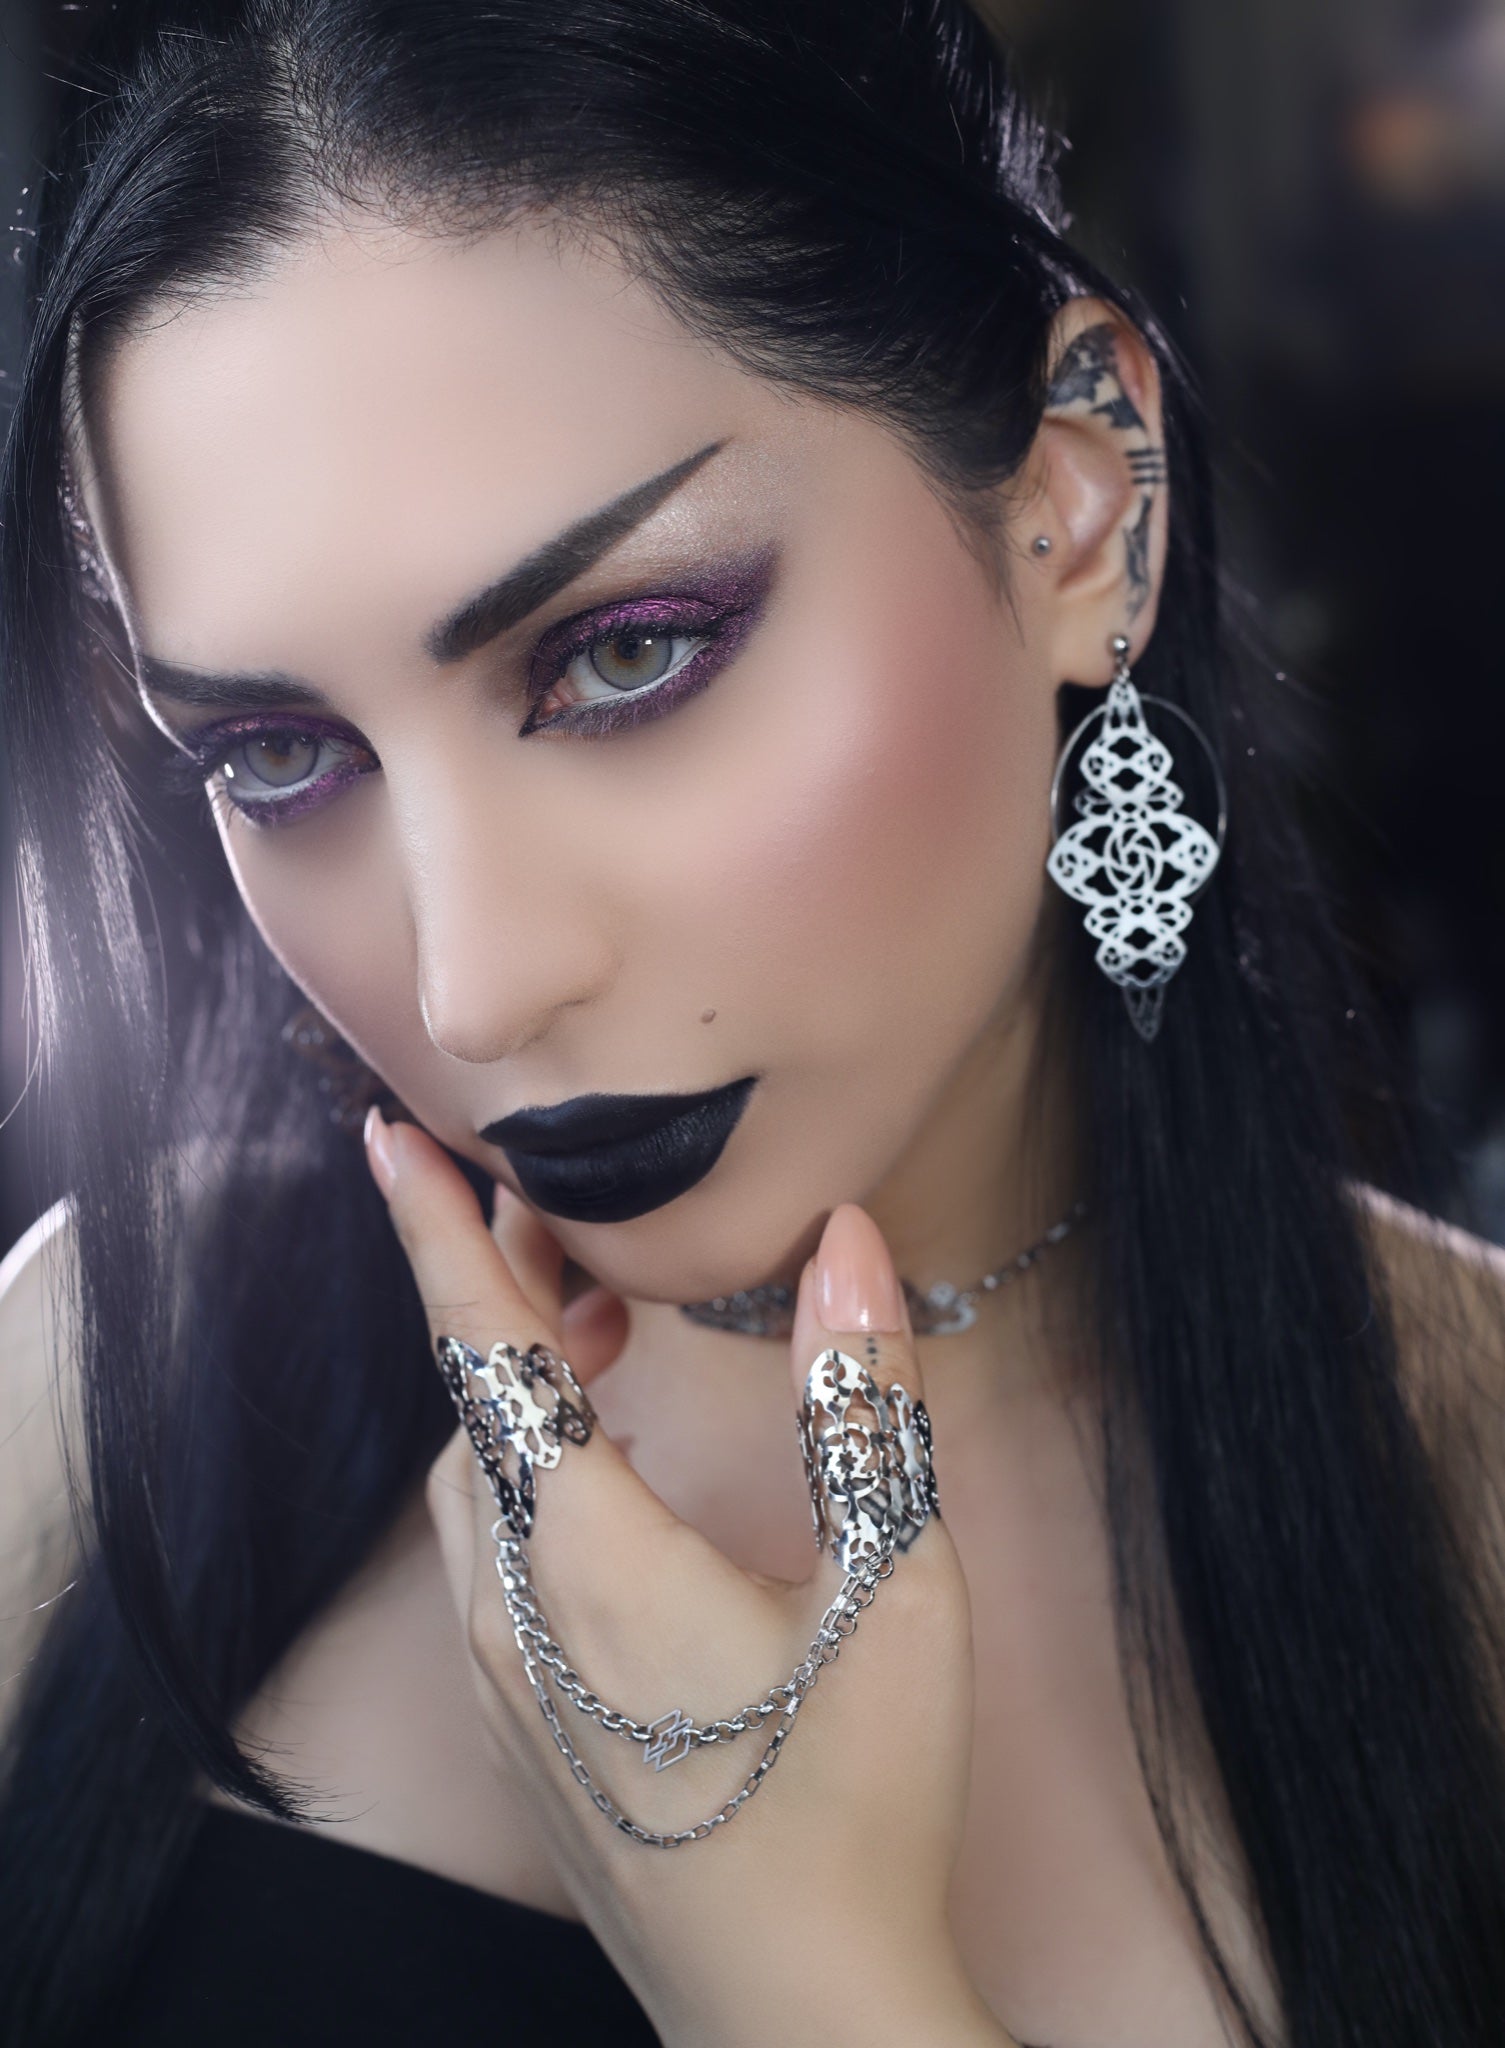 A striking gothic model showcases Myril Jewels' intricate accessories, featuring ornate silver earrings and matching rings. Her dramatic makeup, including deep black lipstick and vibrant purple eyeshadow, complements the bold, dark-avantgarde aesthetic of the jewelry, ideal for festival wear or as a statement piece in a goth-chic ensemble.